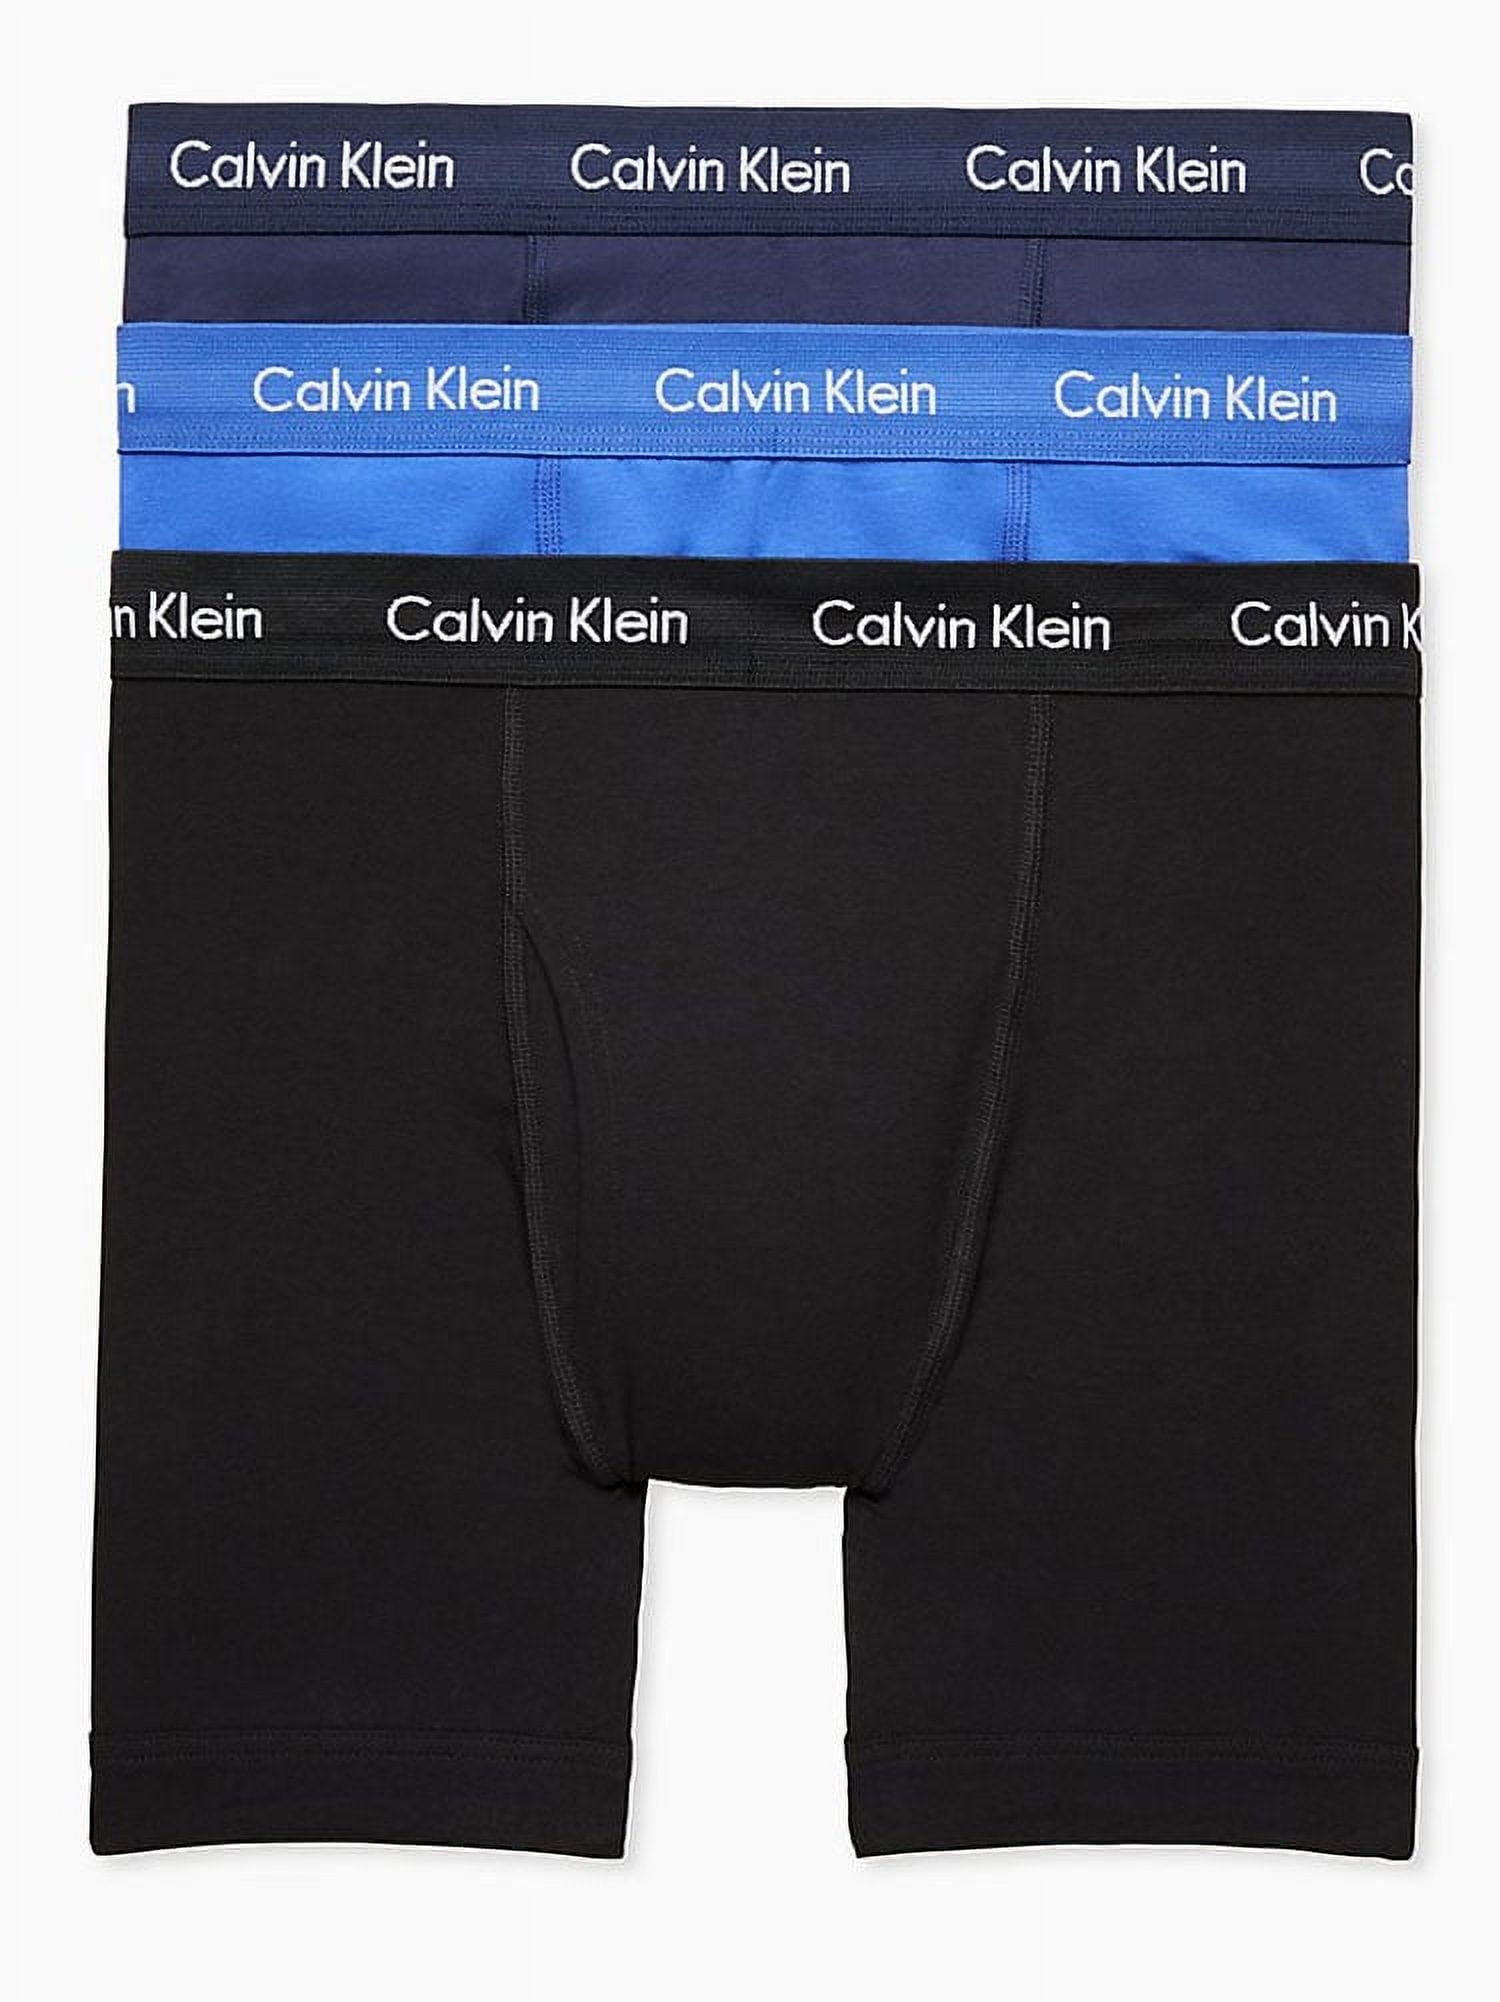 his fashion, Calvin Klein underwear, exclusively available at his fashion